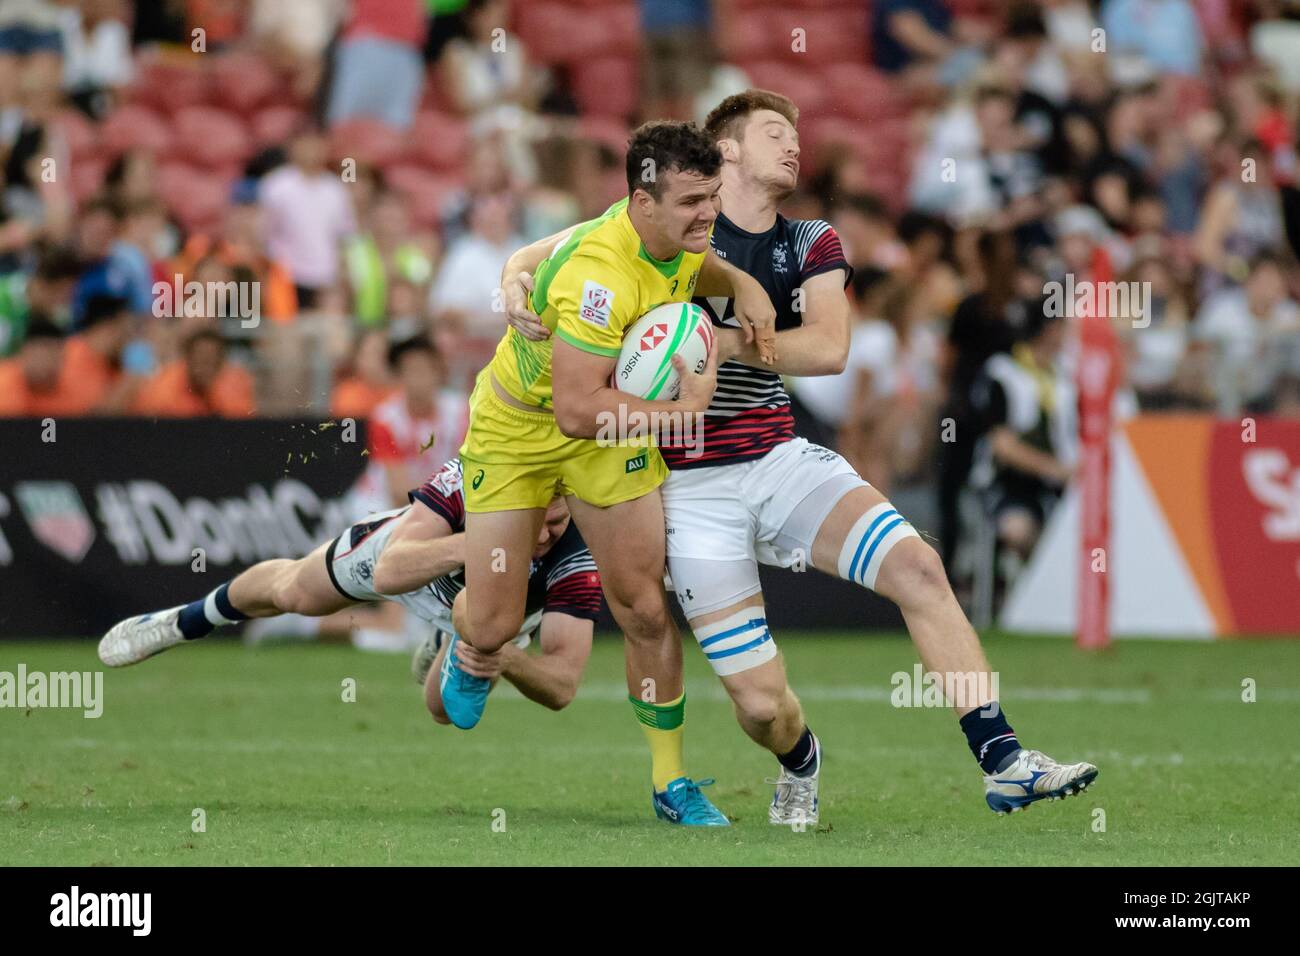 SINGAPORE-APRIL 13:Australia 7s Team (yellow) plays against Hong Kong 7s team (blue/red) during Day 1 of HSBC World Rugby Singapore Sevens on April 13, 2019 at National Stadium in Singapore Stock Photo